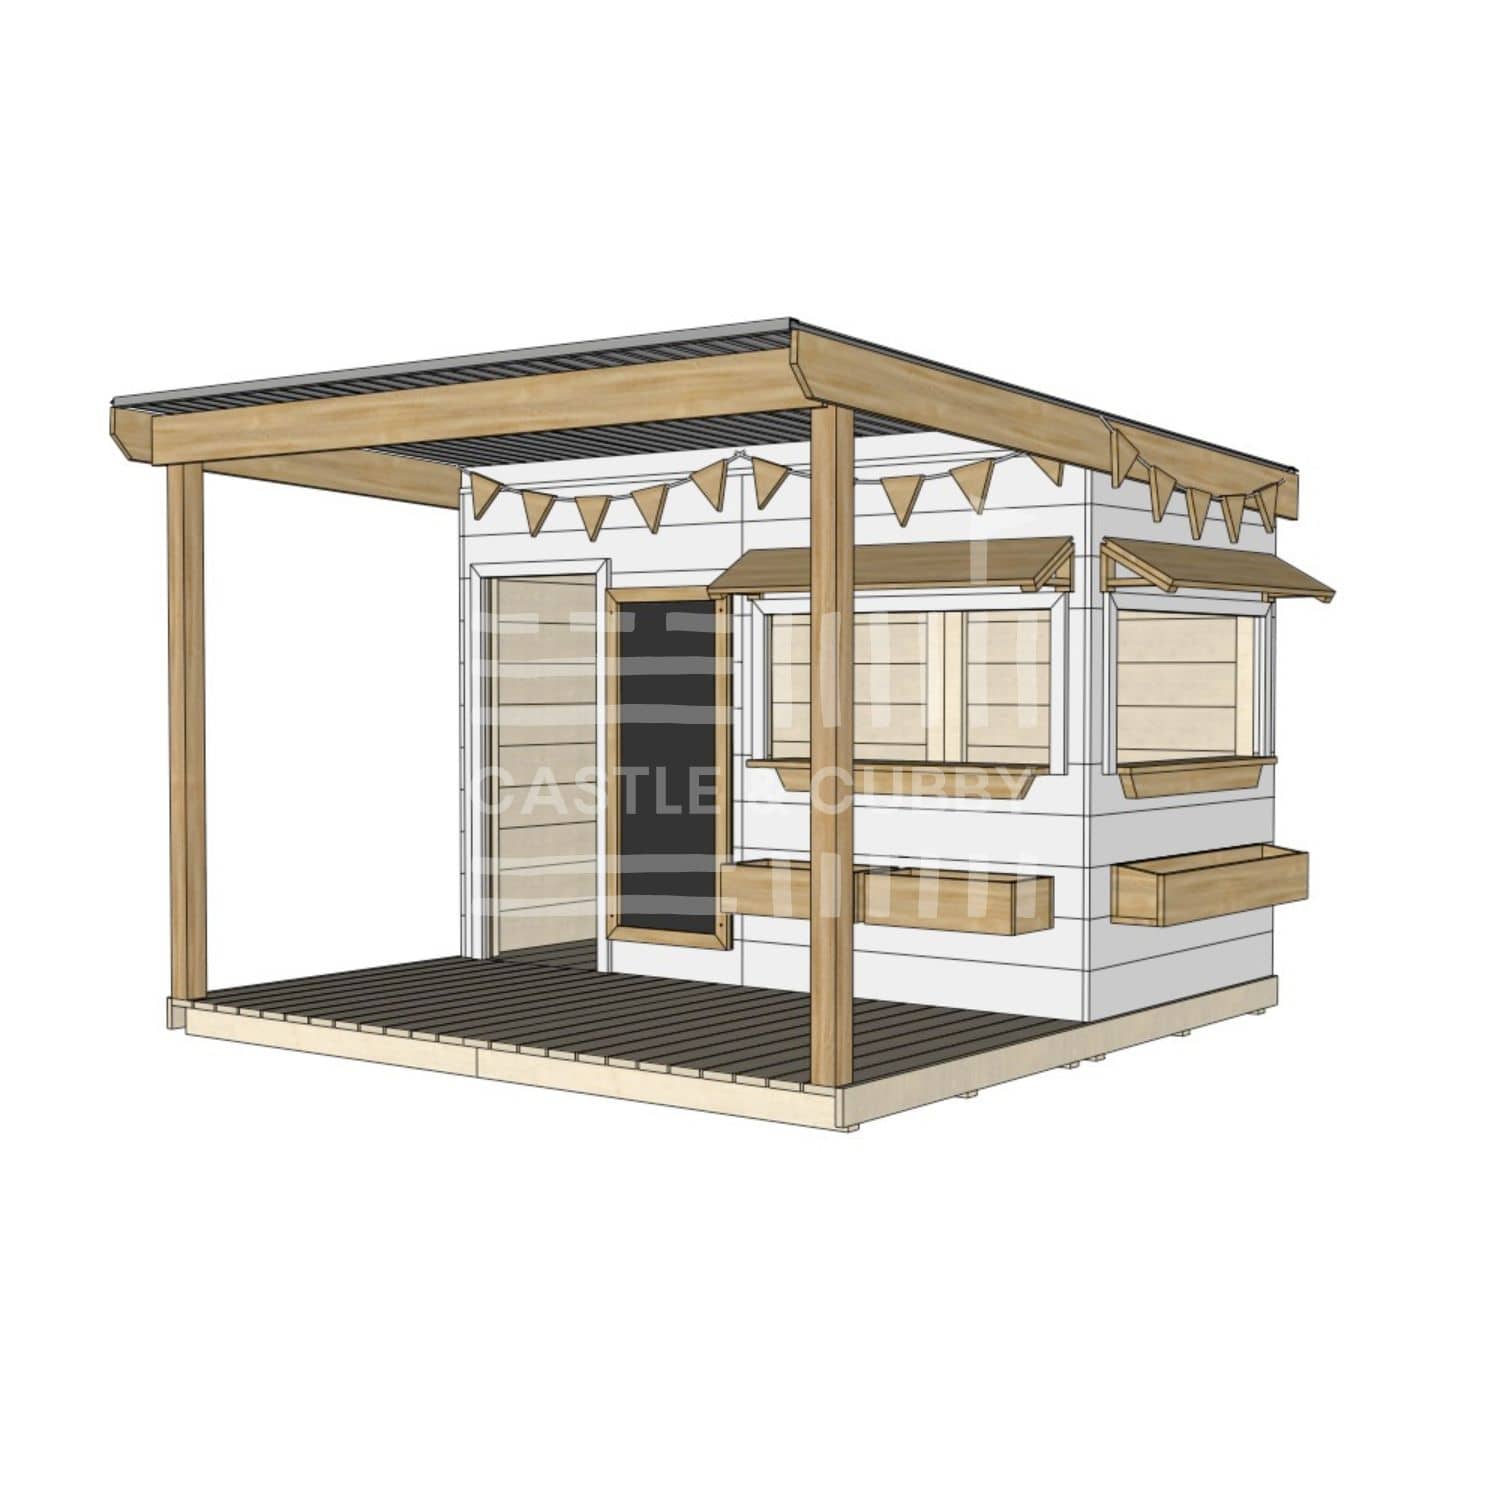 A commercial grade painted wooden midi rectangle cubby house with front verandah and accessories